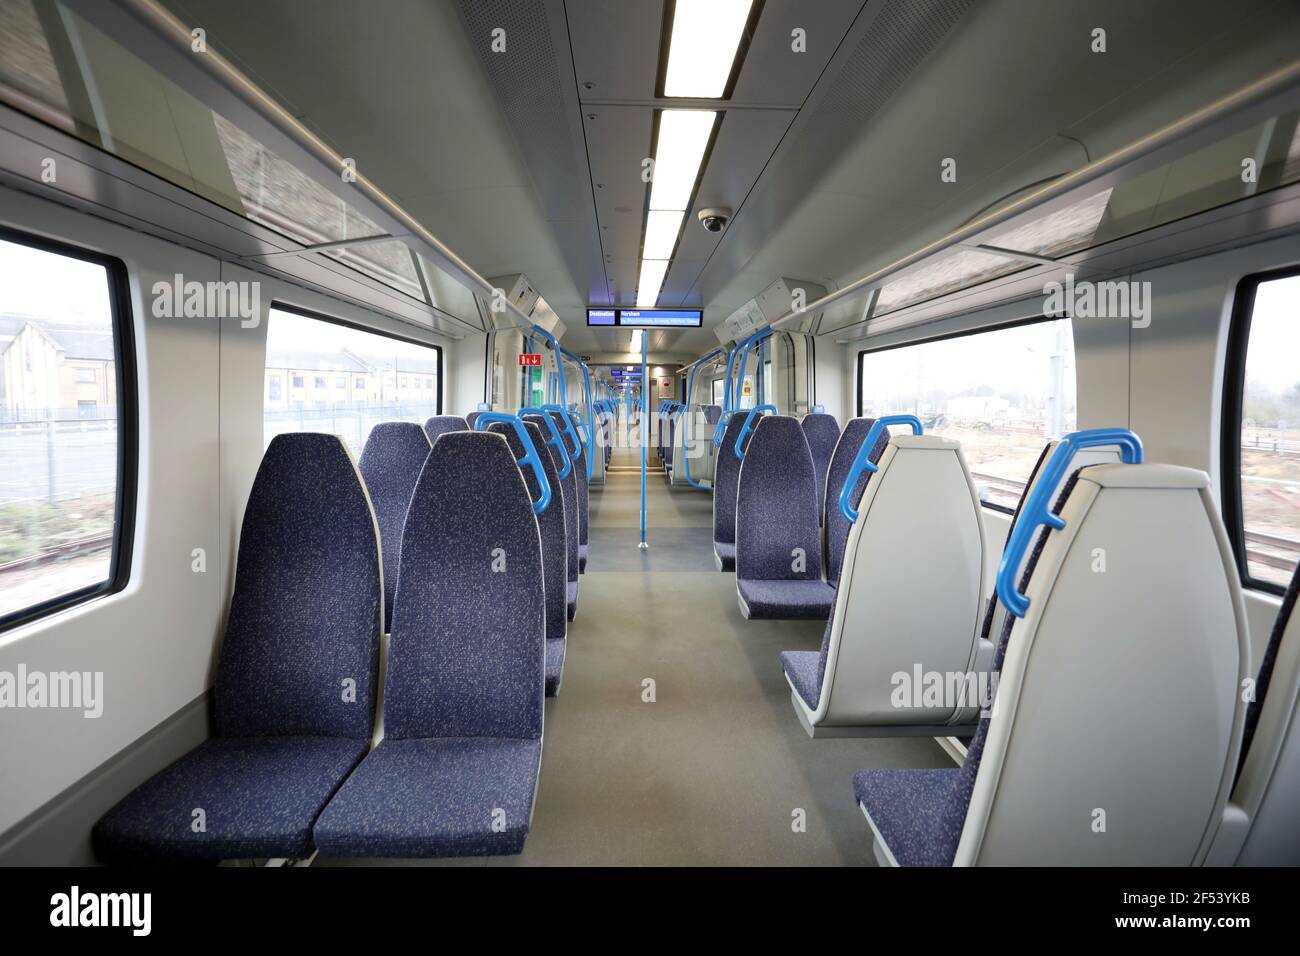 Peterborough, UK. 23rd Mar, 2021. One year on from the start of lockdown, and this Thameslink train from Peterborough to Horsham is virtually deserted. Today marks the first anniversary of the start of UK lockdown restrictions because of the COVID-19 Coronavirus pandemic. A national minute's silence at 12.00pm marks the moment of reflection. Credit: Paul Marriott/Alamy Live News Stock Photo